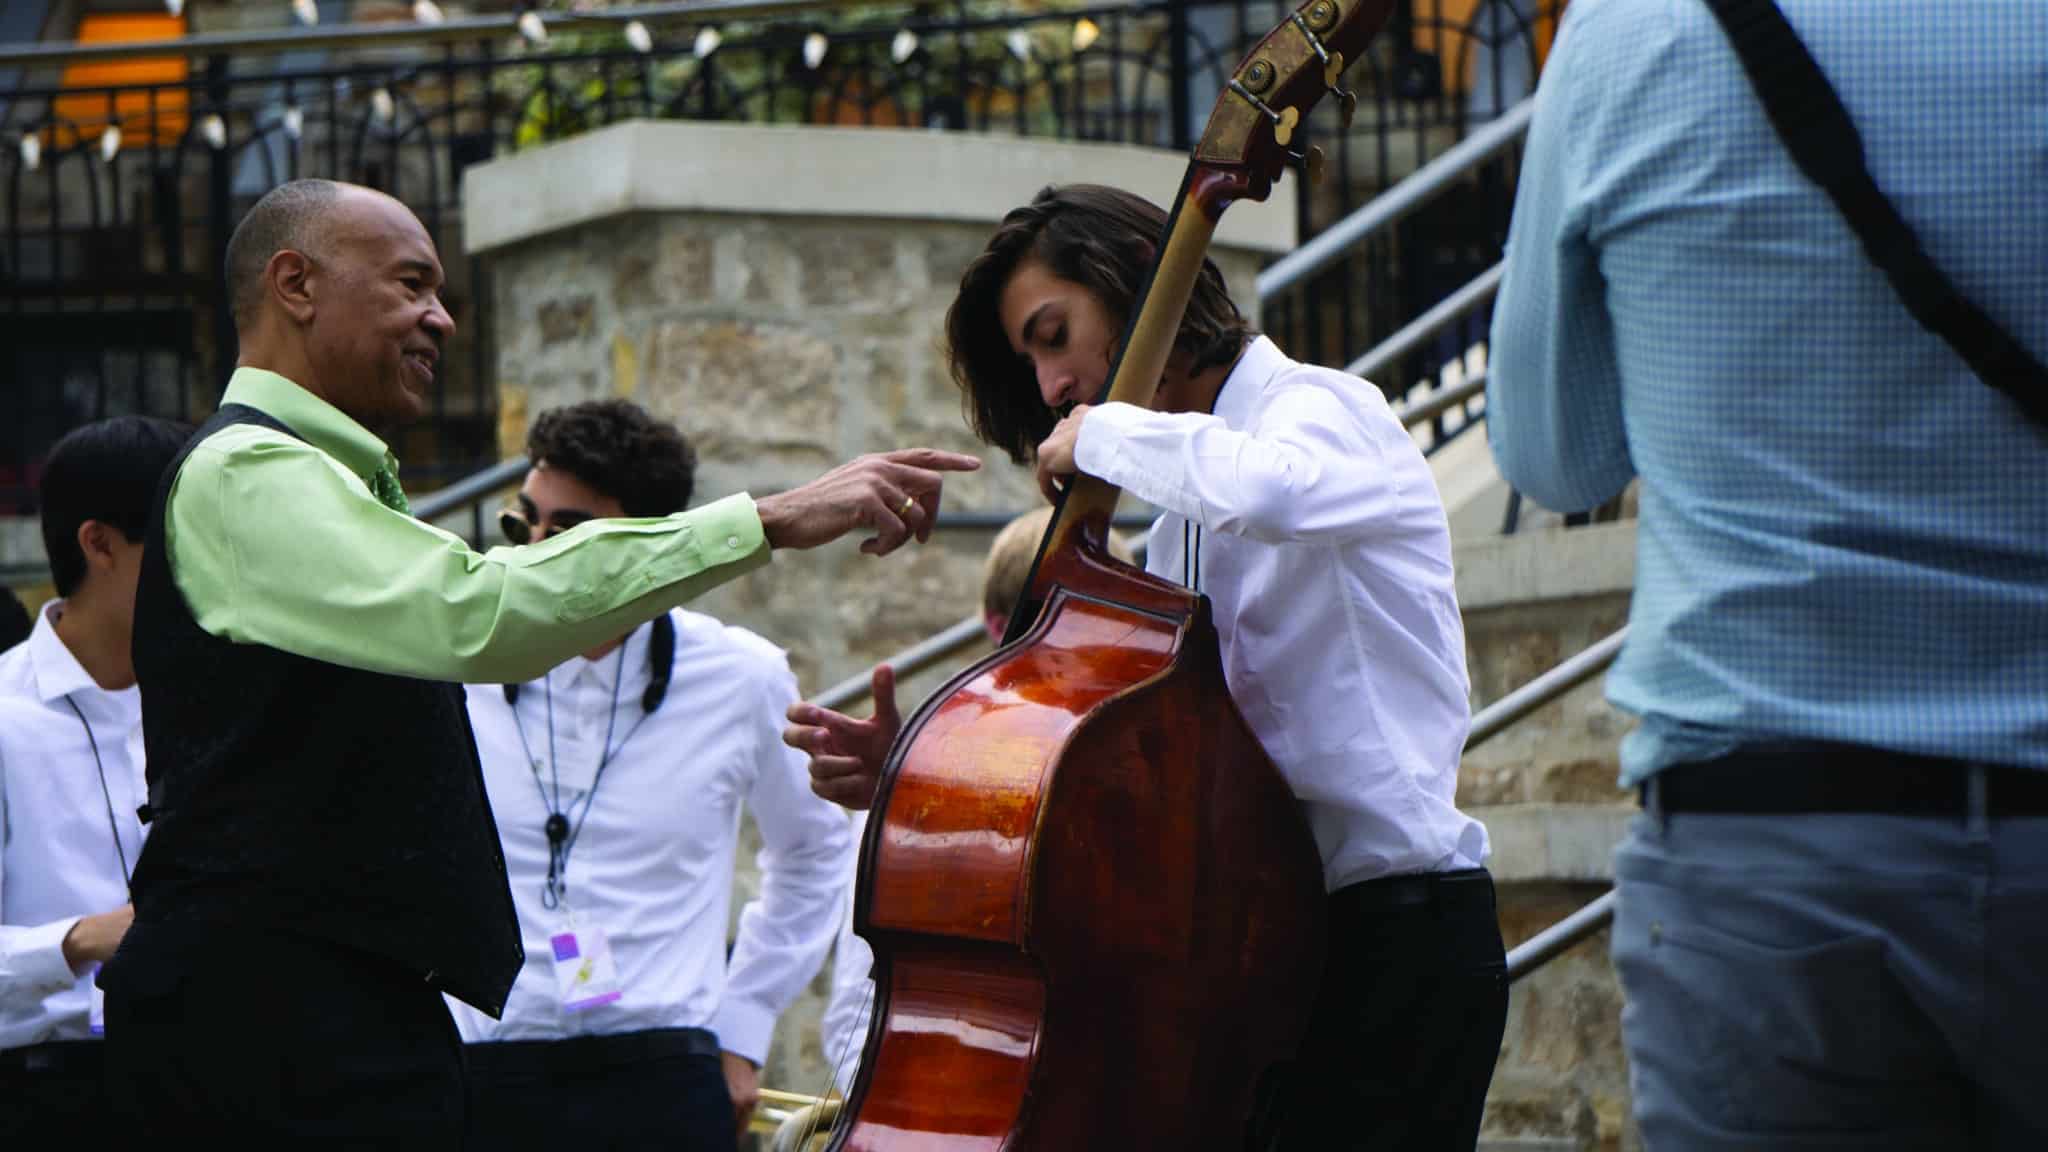 A man is holding a cello and another man is holding a bass.